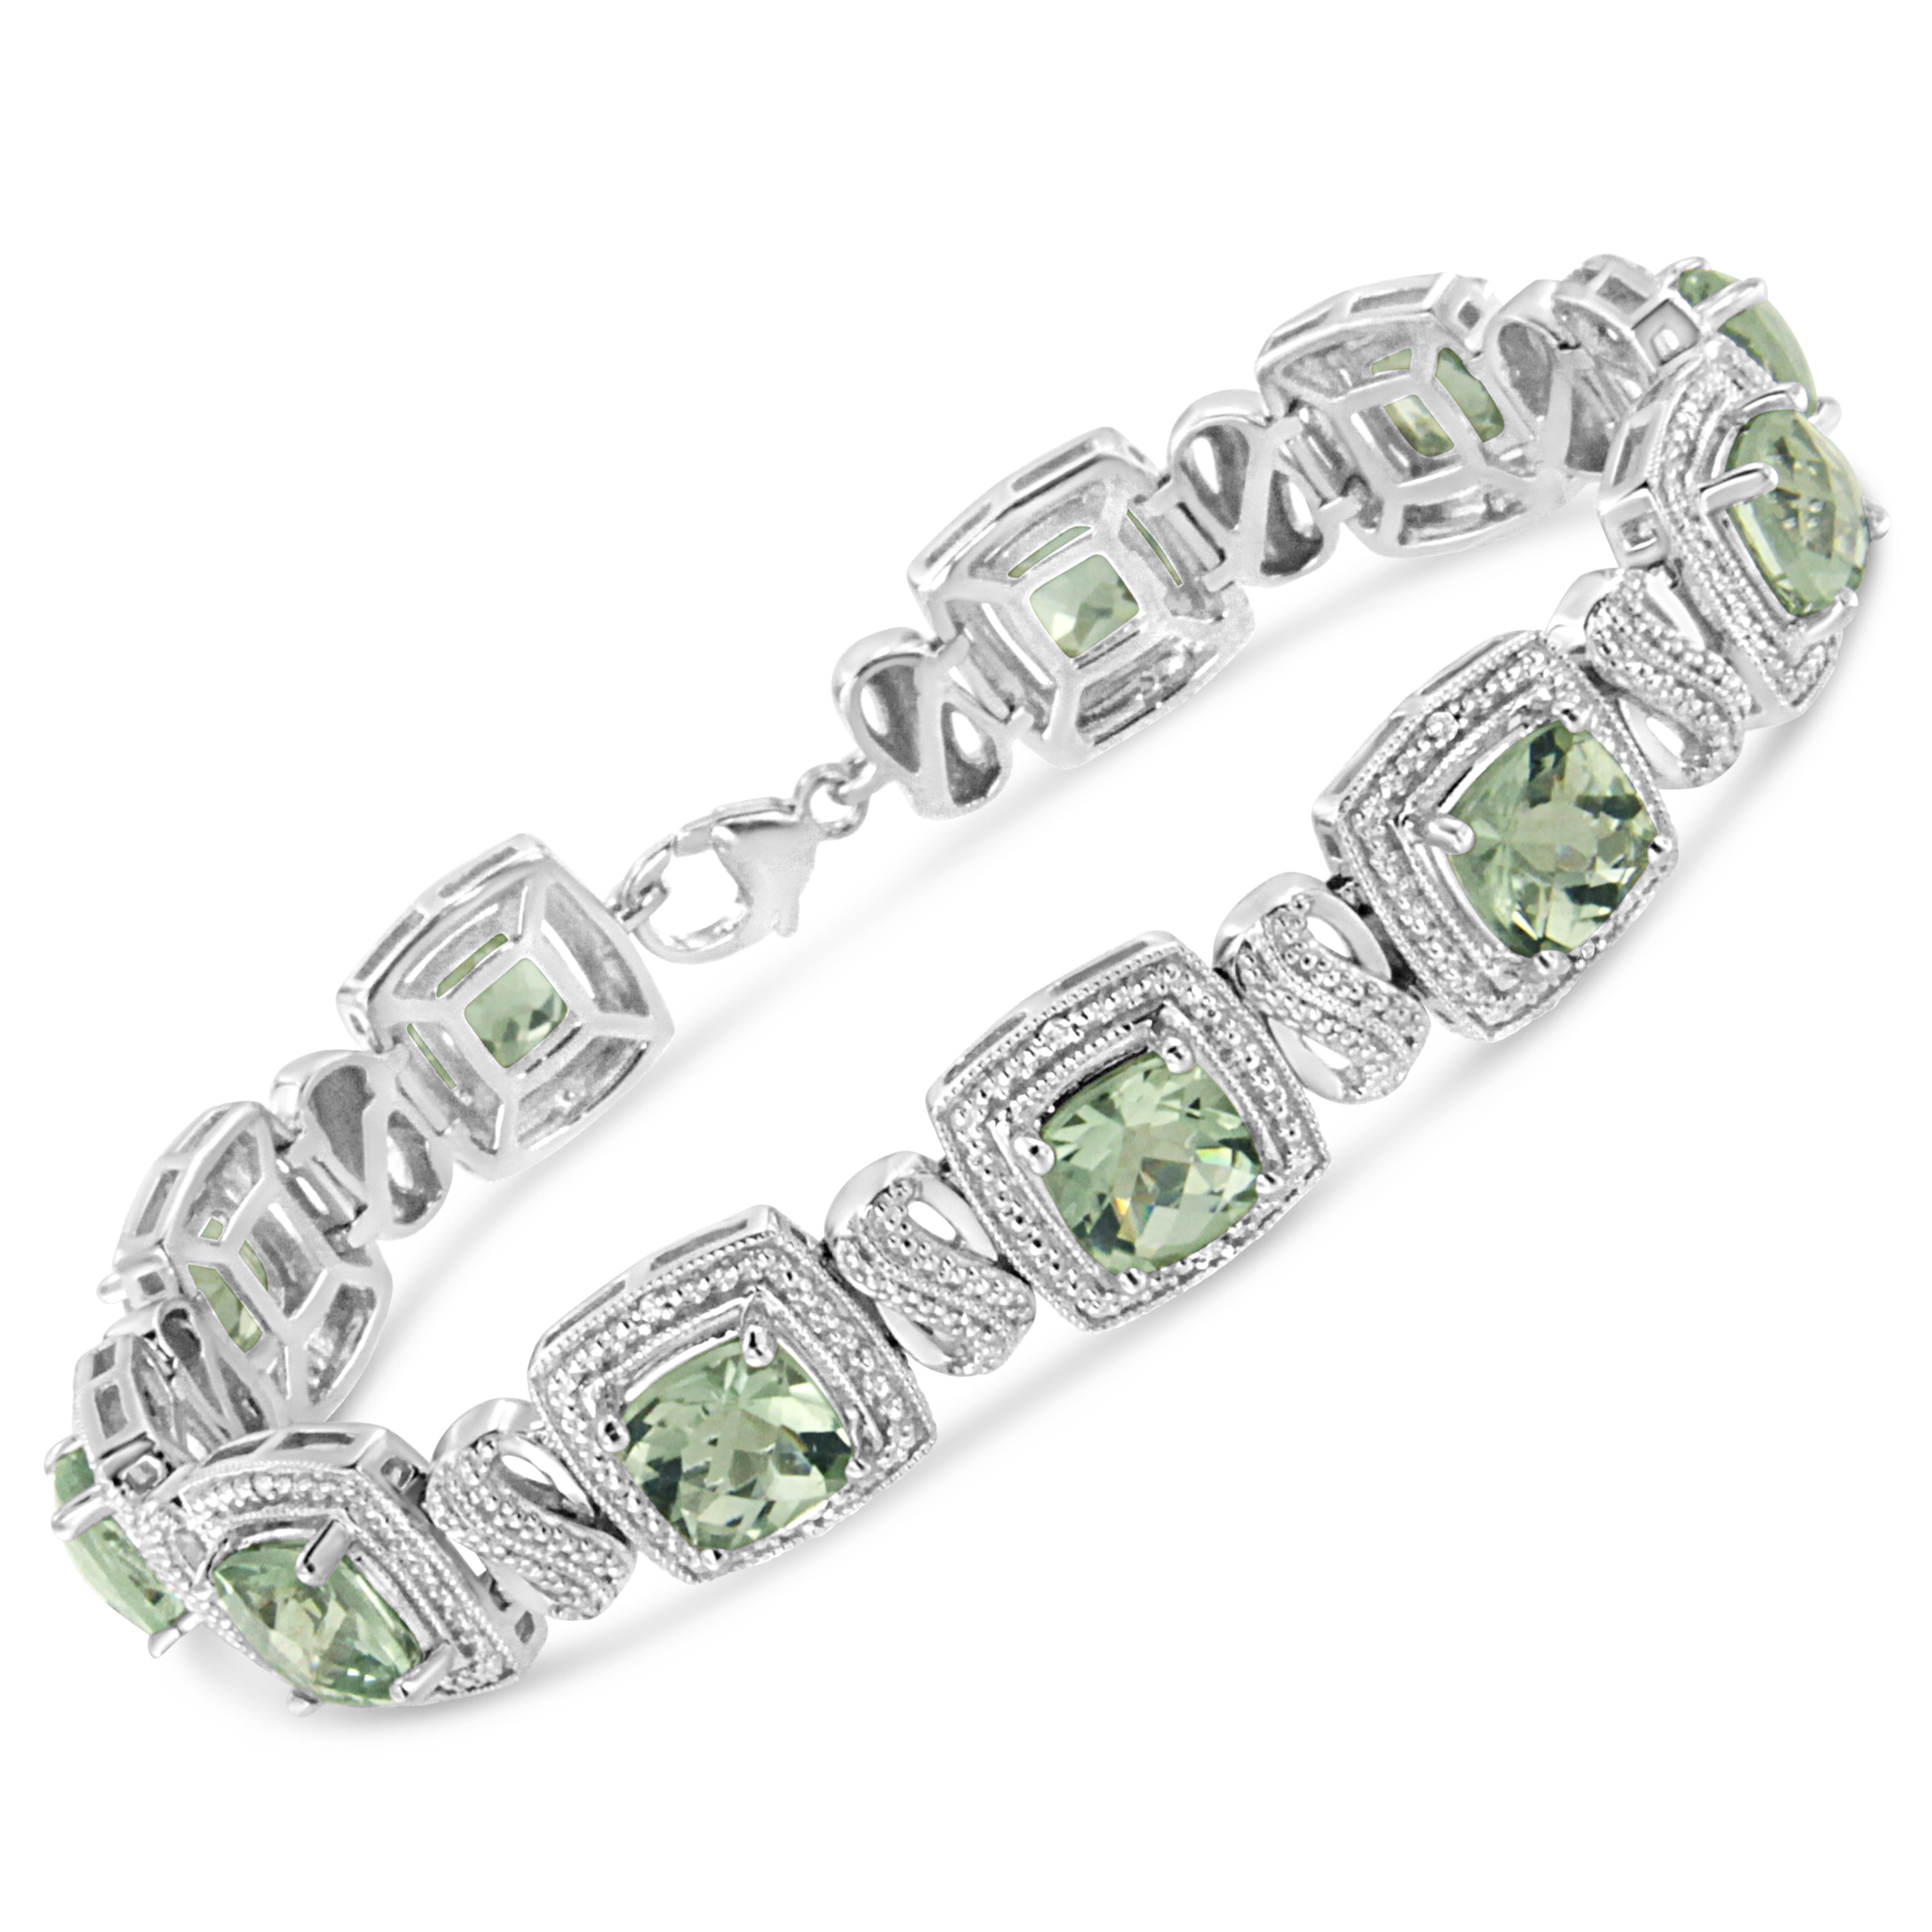 Make a glistening fest for your sweetheart's wrist with this sparkling green amethyst and diamond bracelet. Styled in remarkable sterling silver this square shape bracelet is embellished with 11 alluring prong set cushion cut green amethyst